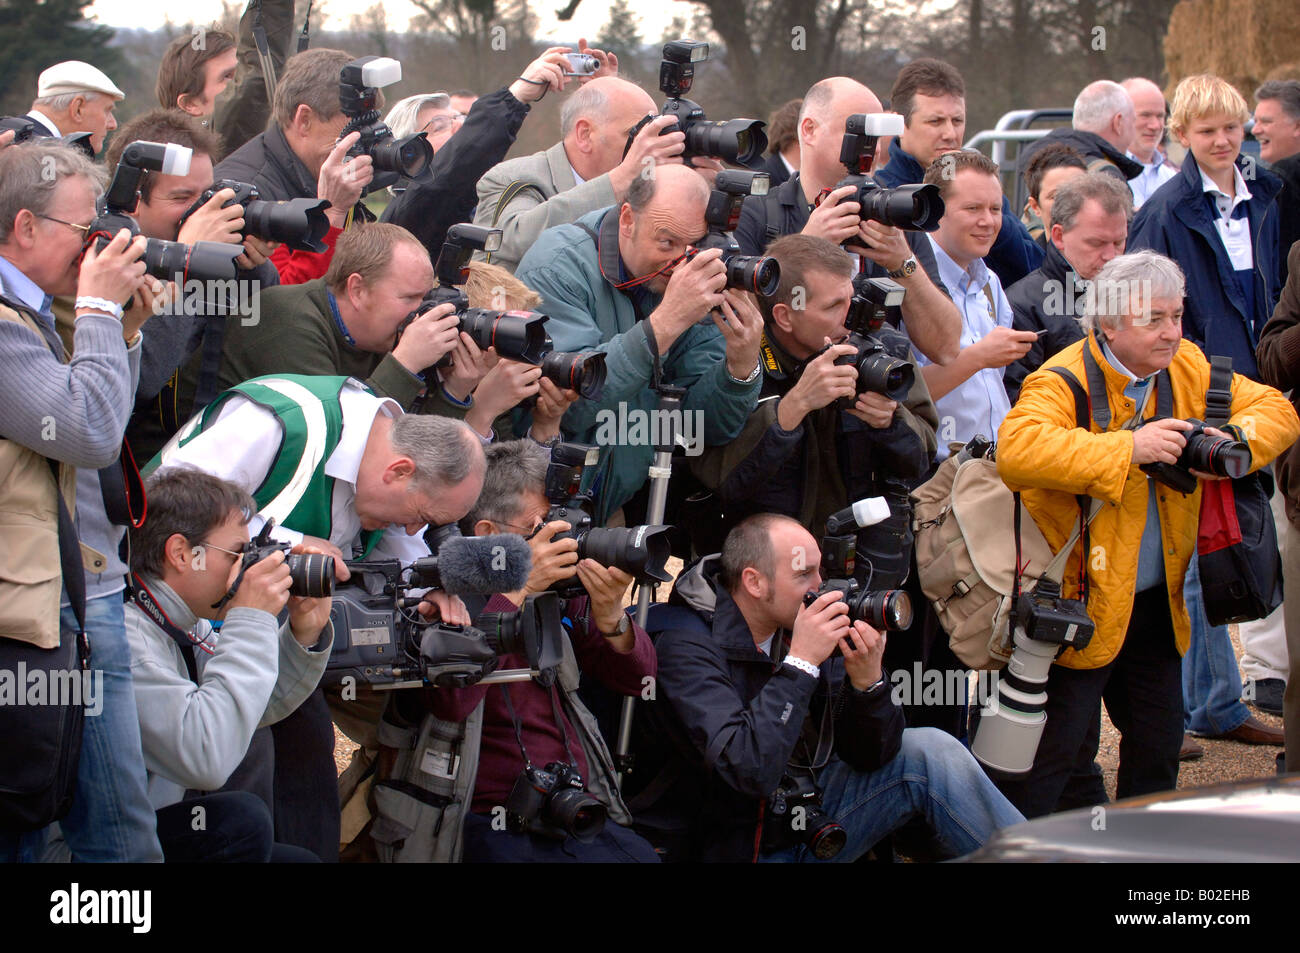 Press pack: a crowd of photographers vying for the best shot at a photo call. Stock Photo